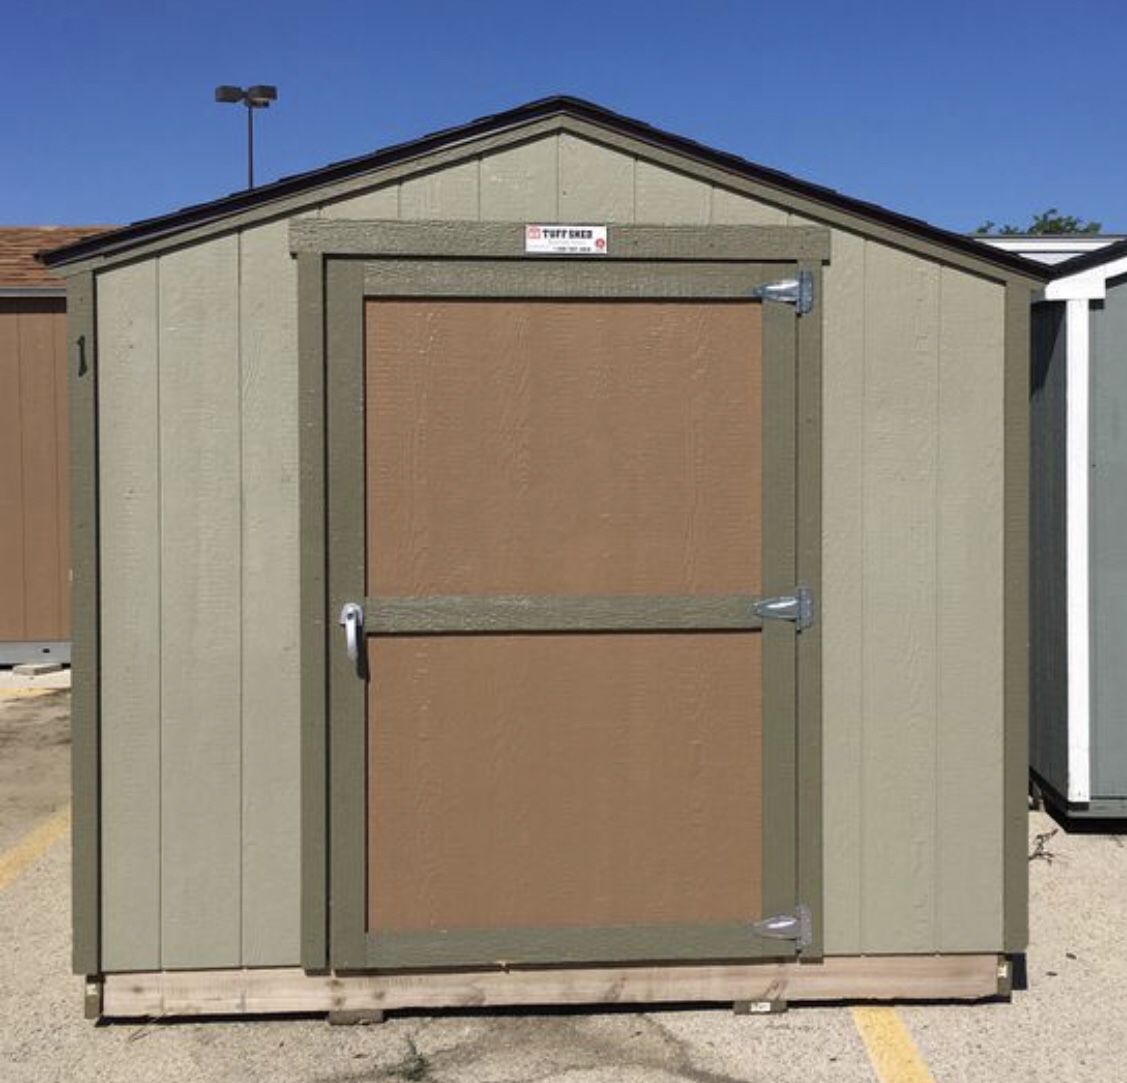 Tuff shed kr600 8x8 delivery and install included